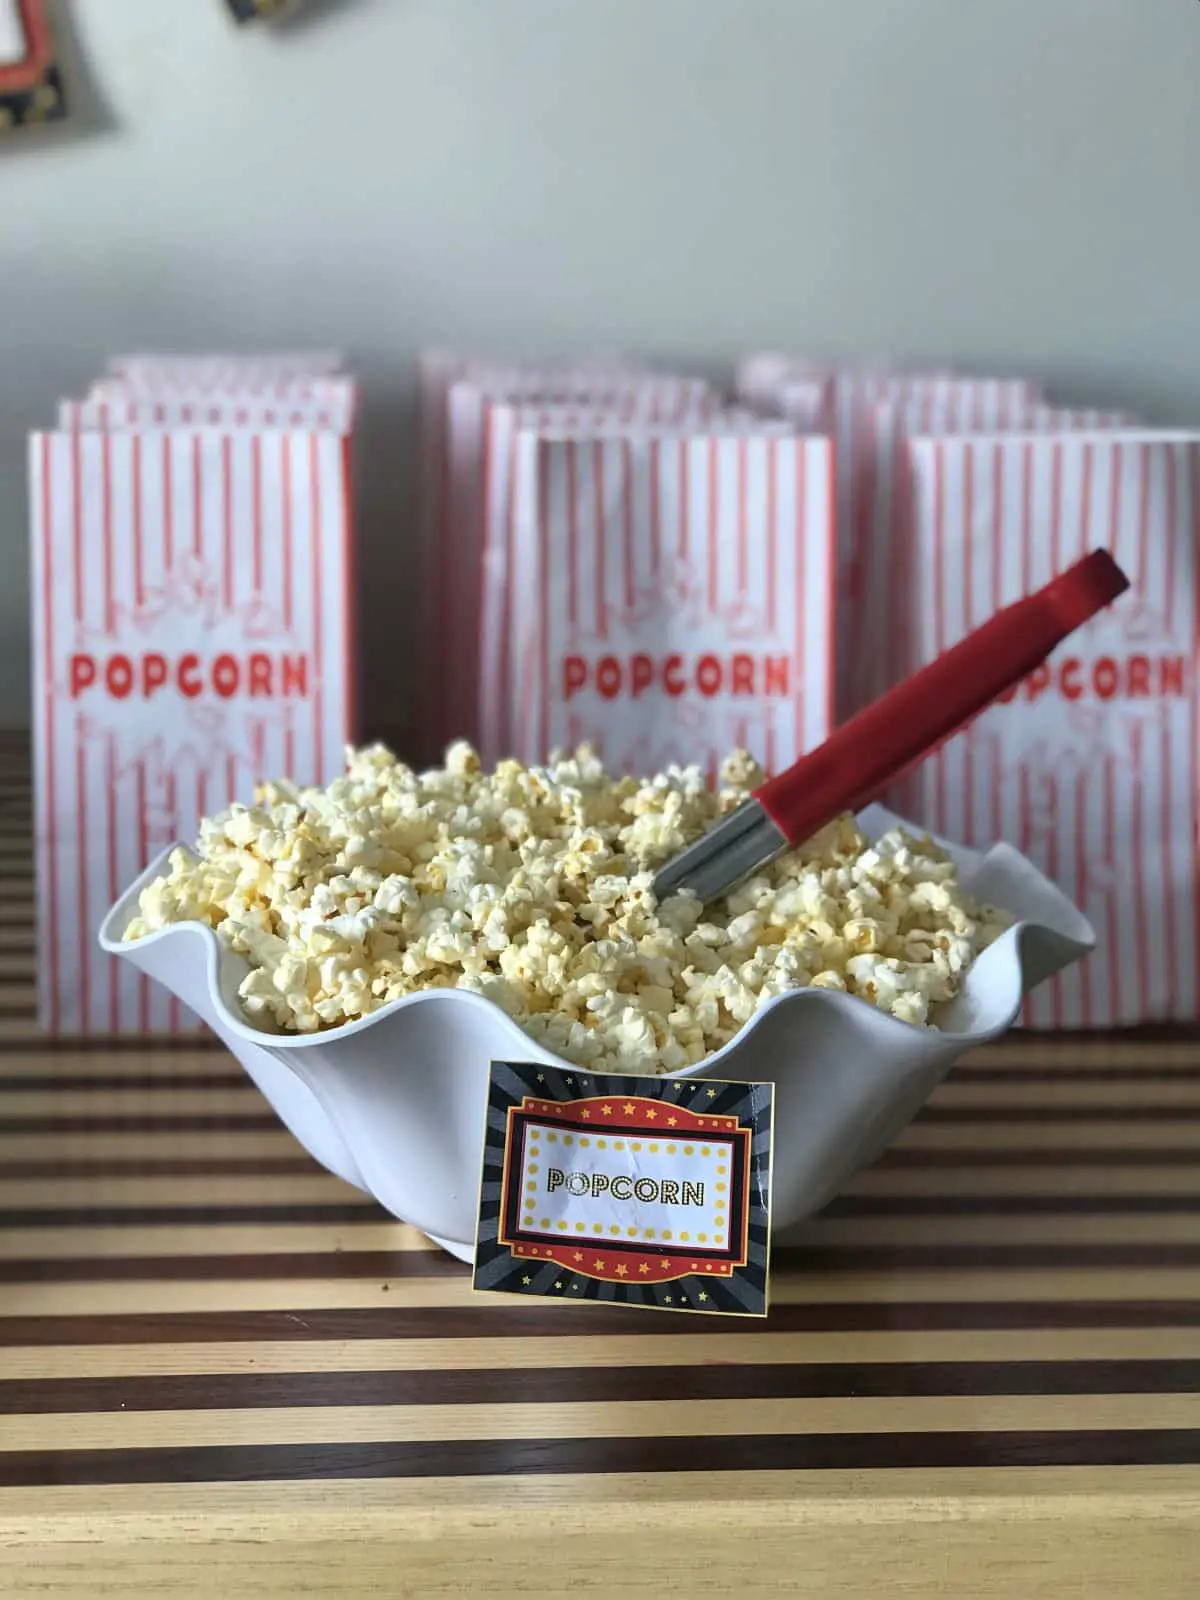 A bowl of movie popcorn with movie theater popcorn bags behind it.